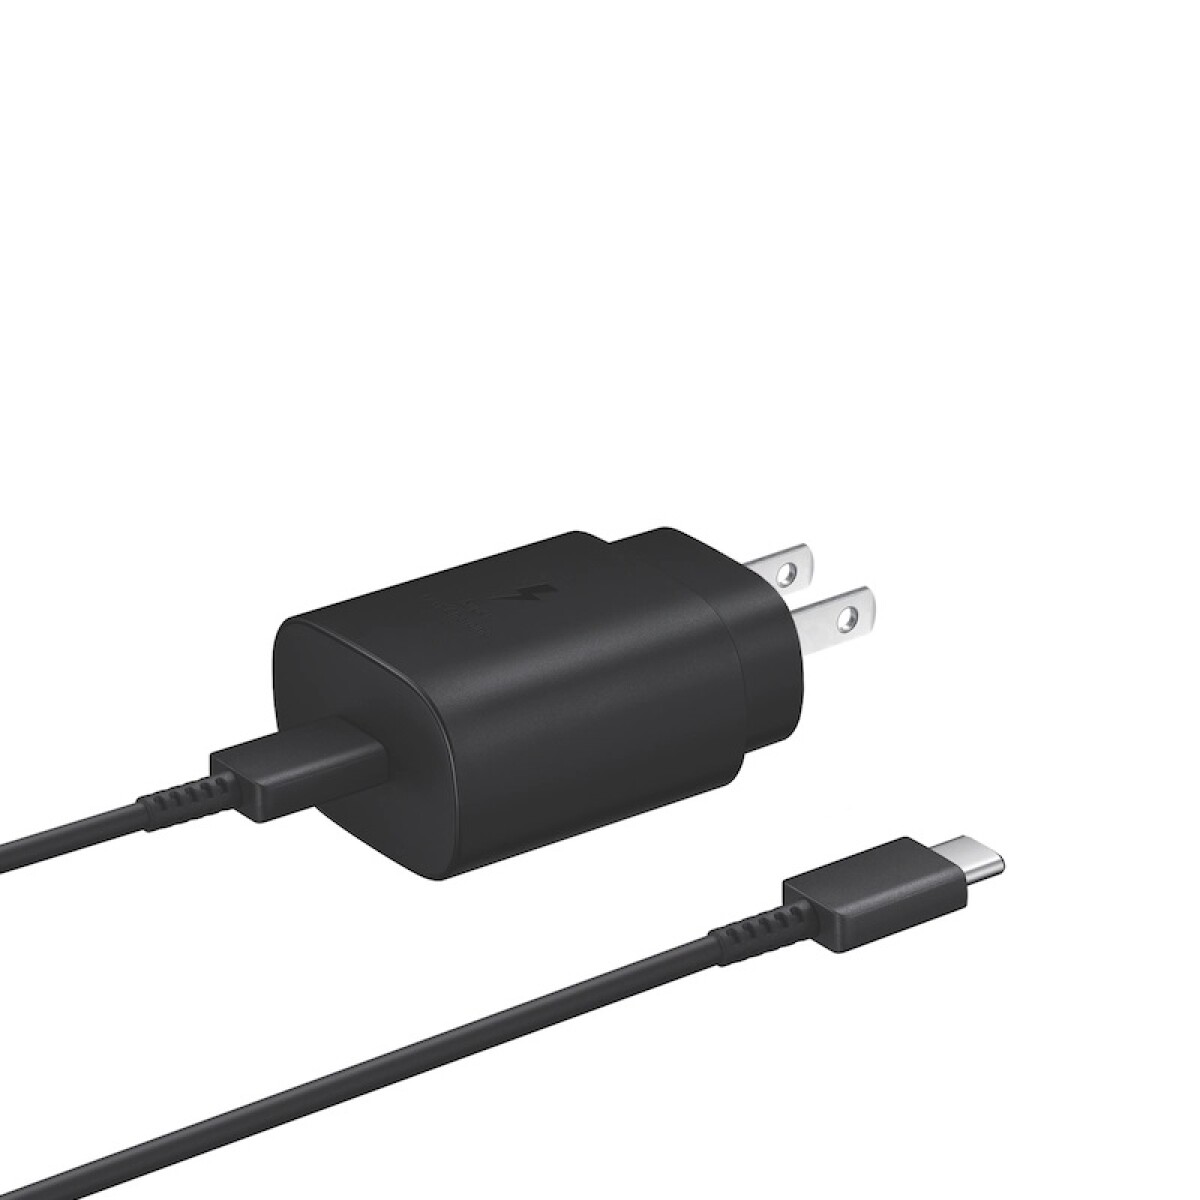 Samsung 25w Usb-c Power Adapter With Usb-c Cable Black 